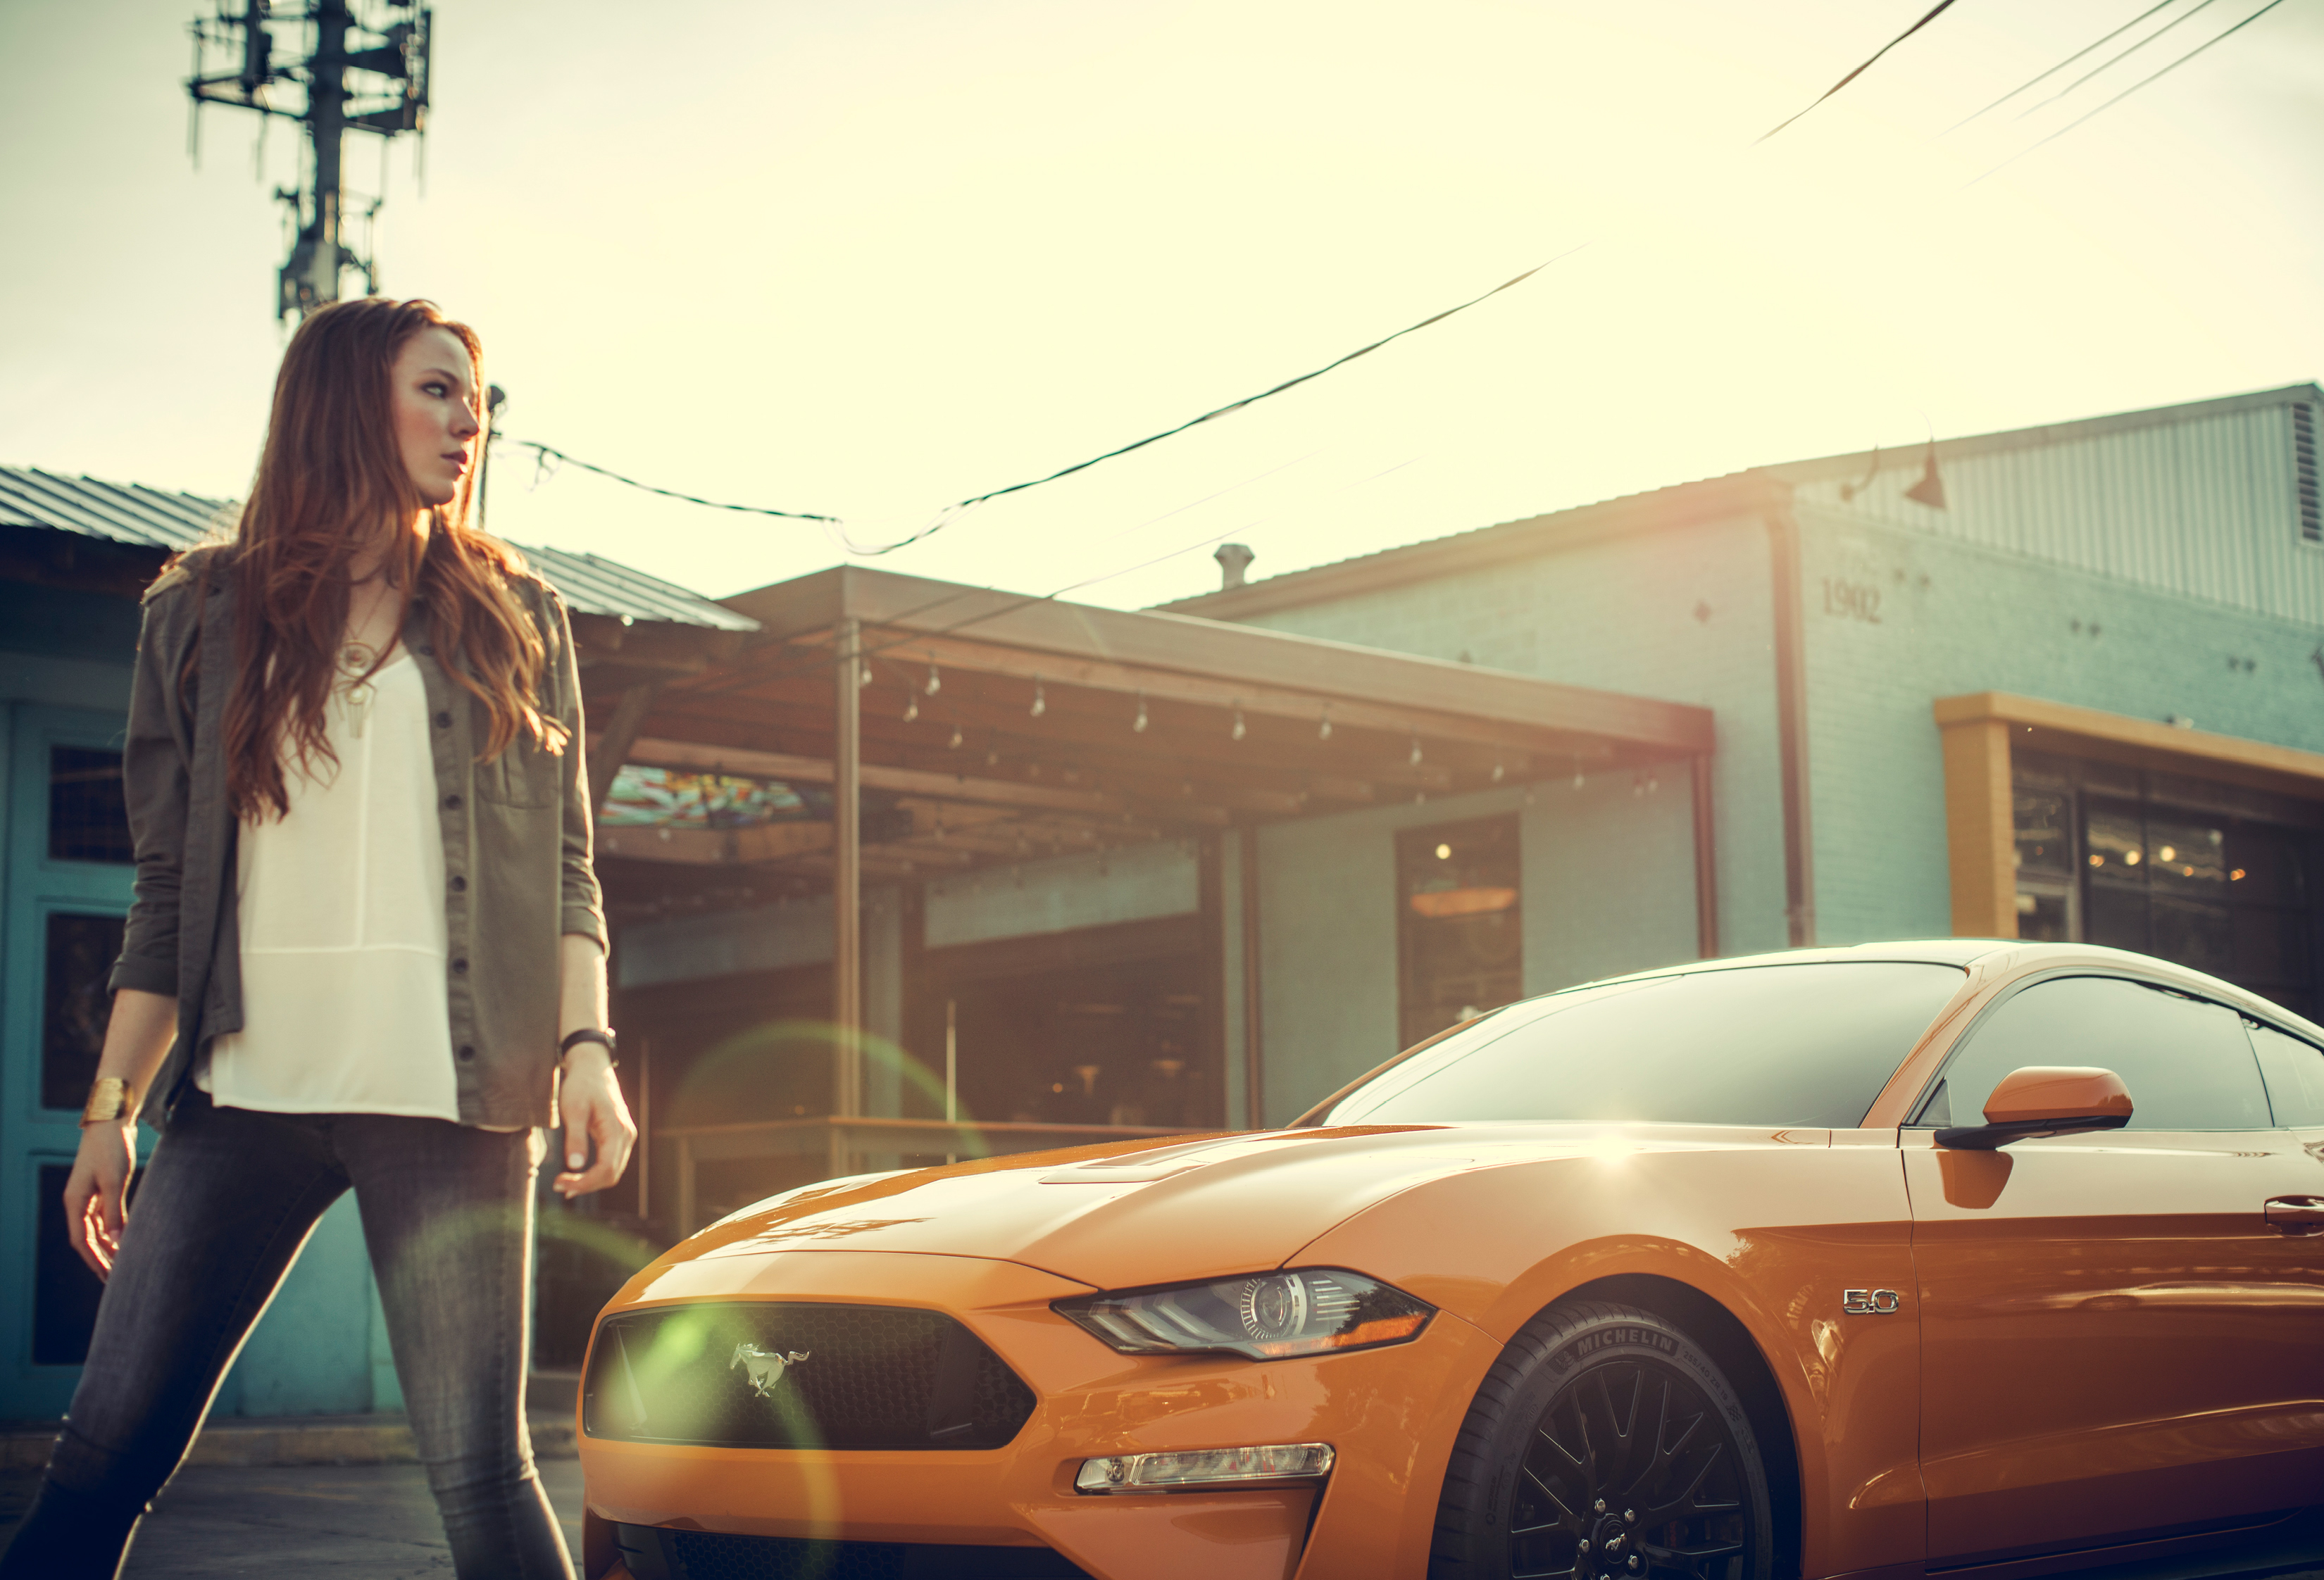 Women With Cars Redhead Ford Mustang Michelin Vehicle Car Jacket Jeans 3300x2244